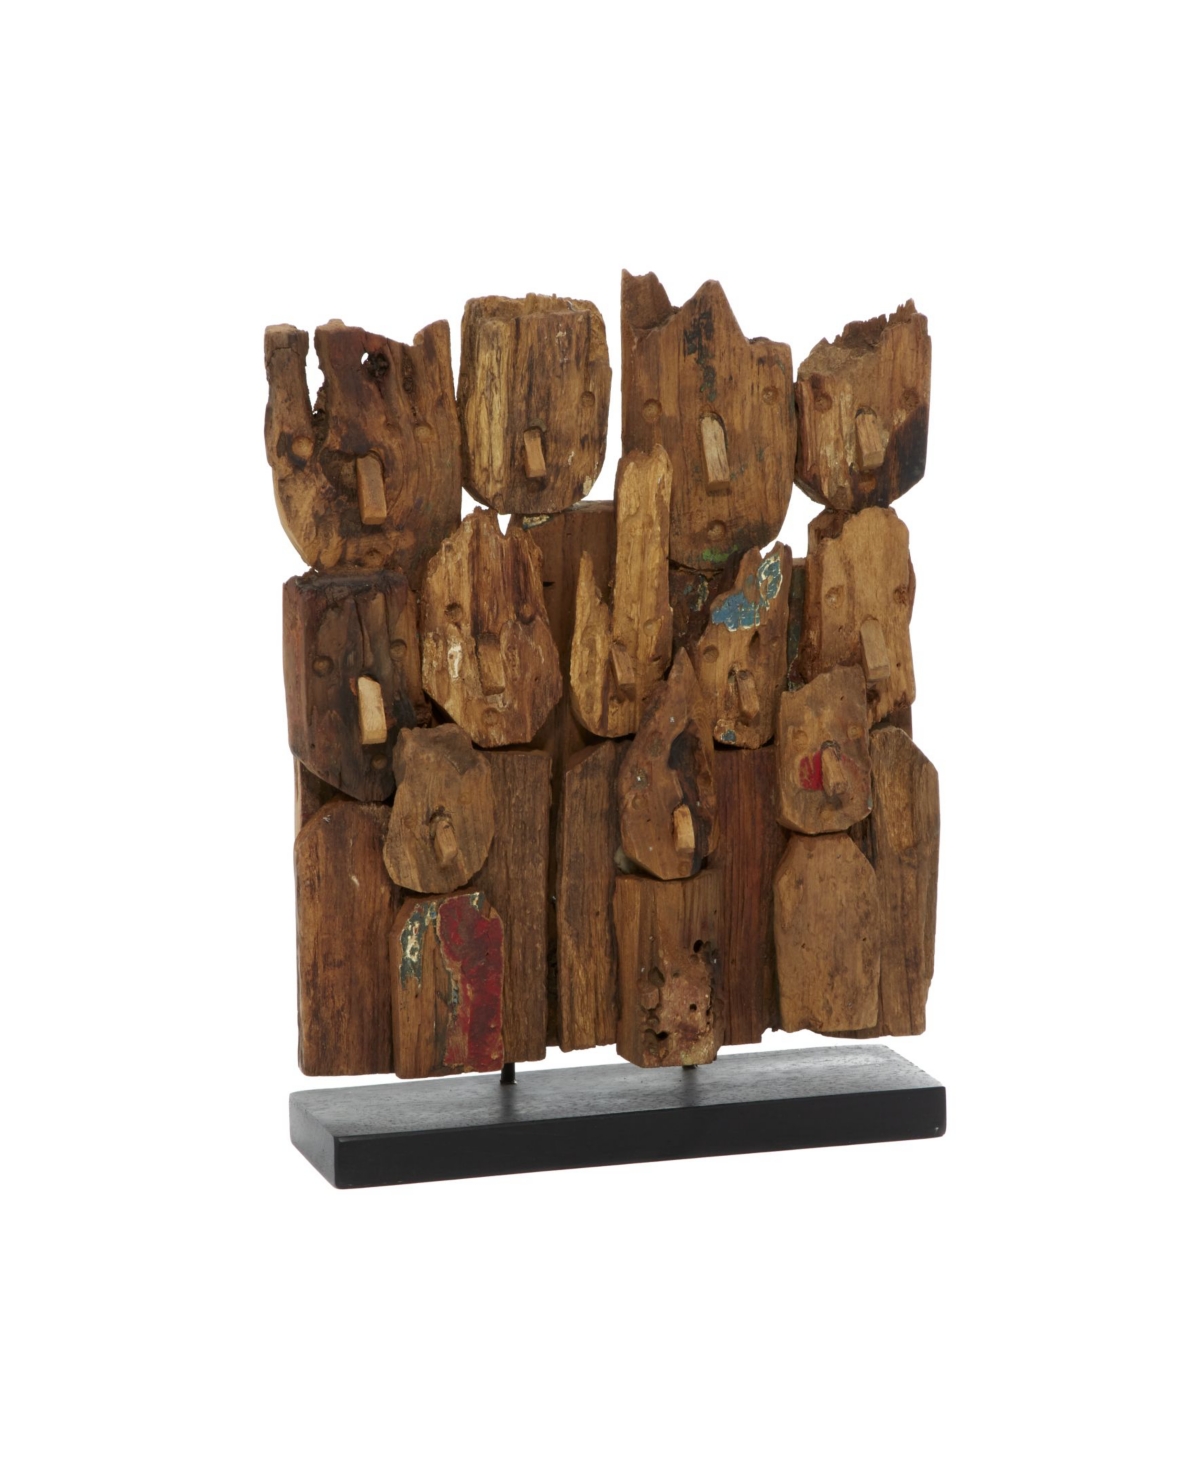 Rosemary Lane Teak Wood Natural Abstract Sculpture, 16" X 13" In Brown